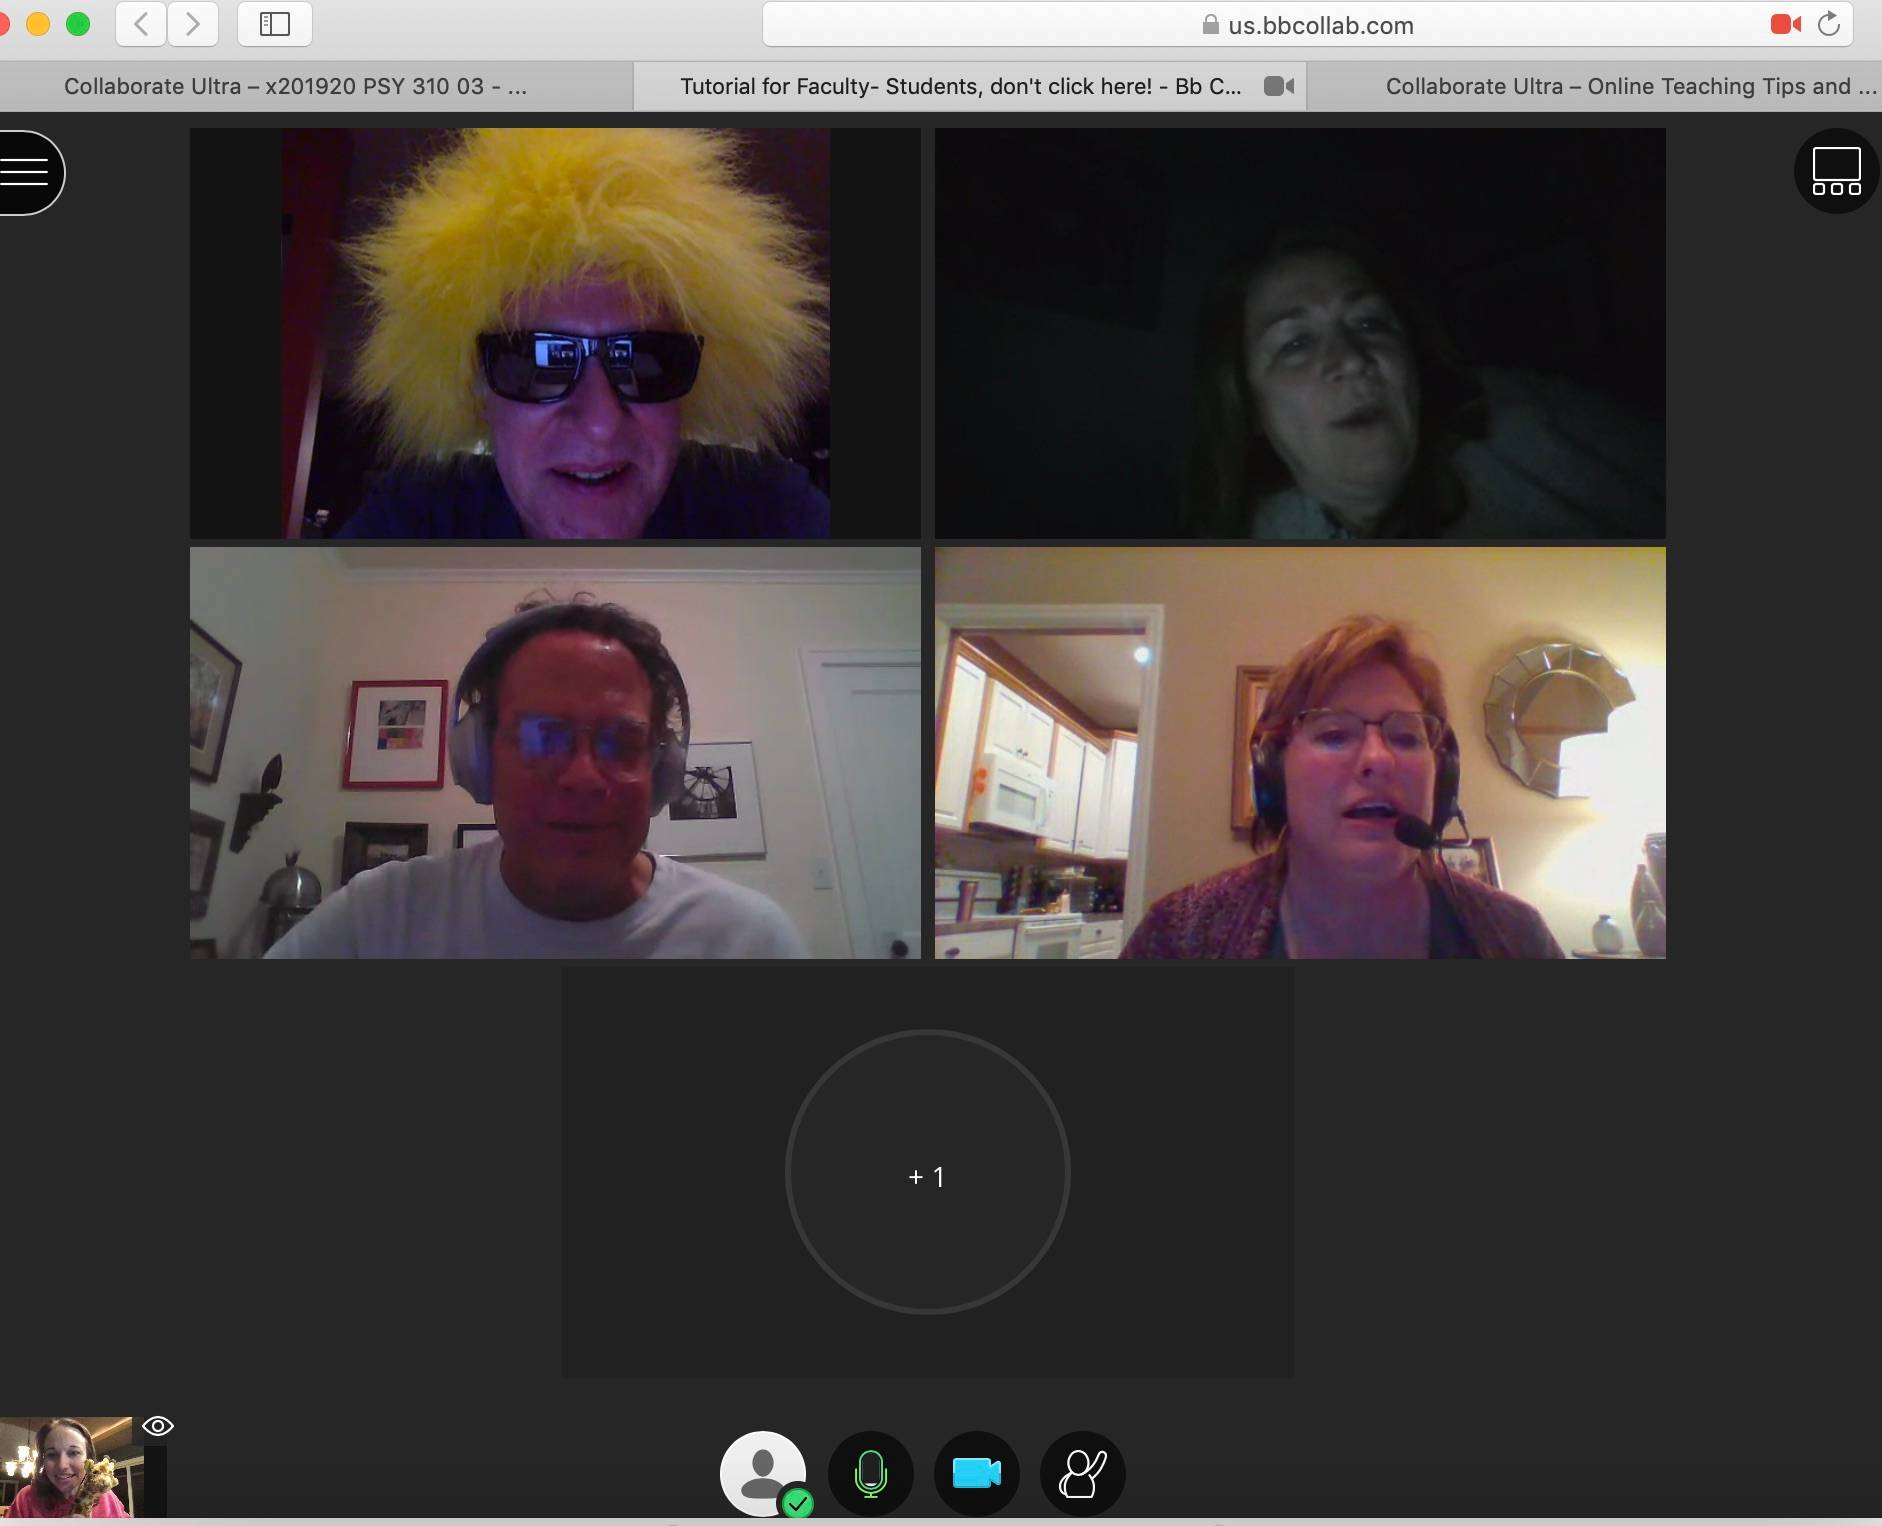 Psychology faculty being jovial on a Zoom meeting